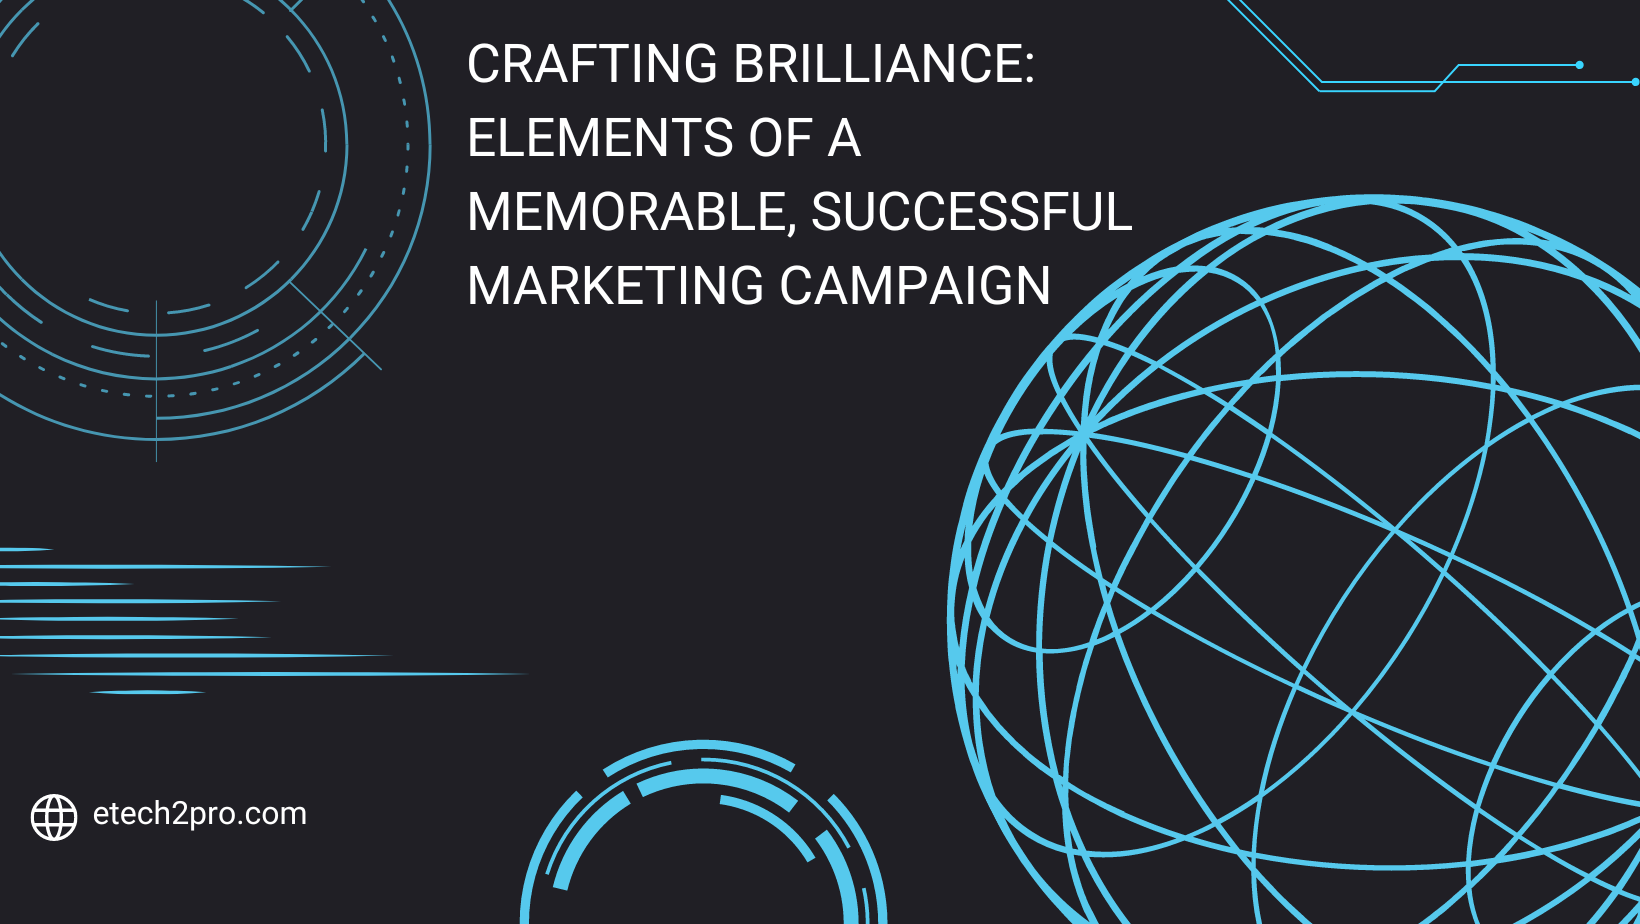 Crafting Brilliance: Elements of a Memorable, Successful Marketing Campaign